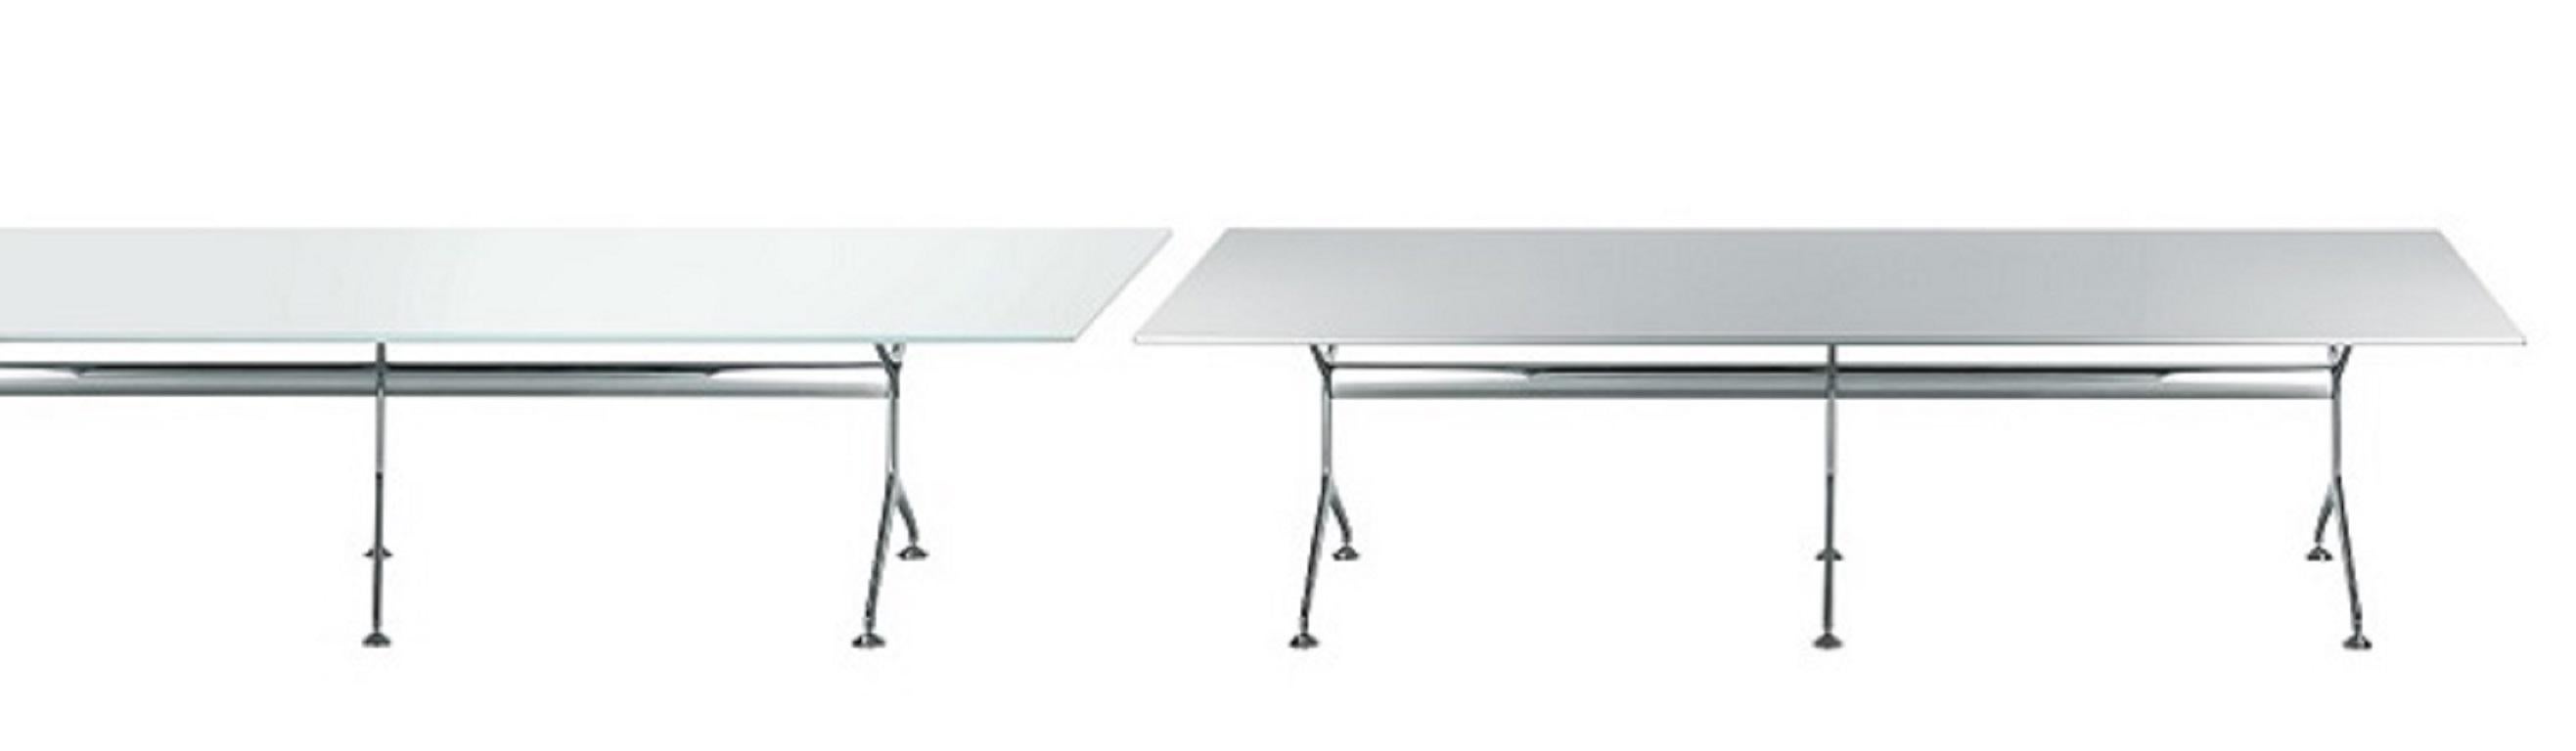 Alias Frametable 295XL in White Top and Polished Aluminium Frame by Alberto Meda

Fixed table with structure made of die-cast aluminium elements, with lacquered or polished finish.
Top in: - Extra light tempered glass, thickness 12 mm (lying